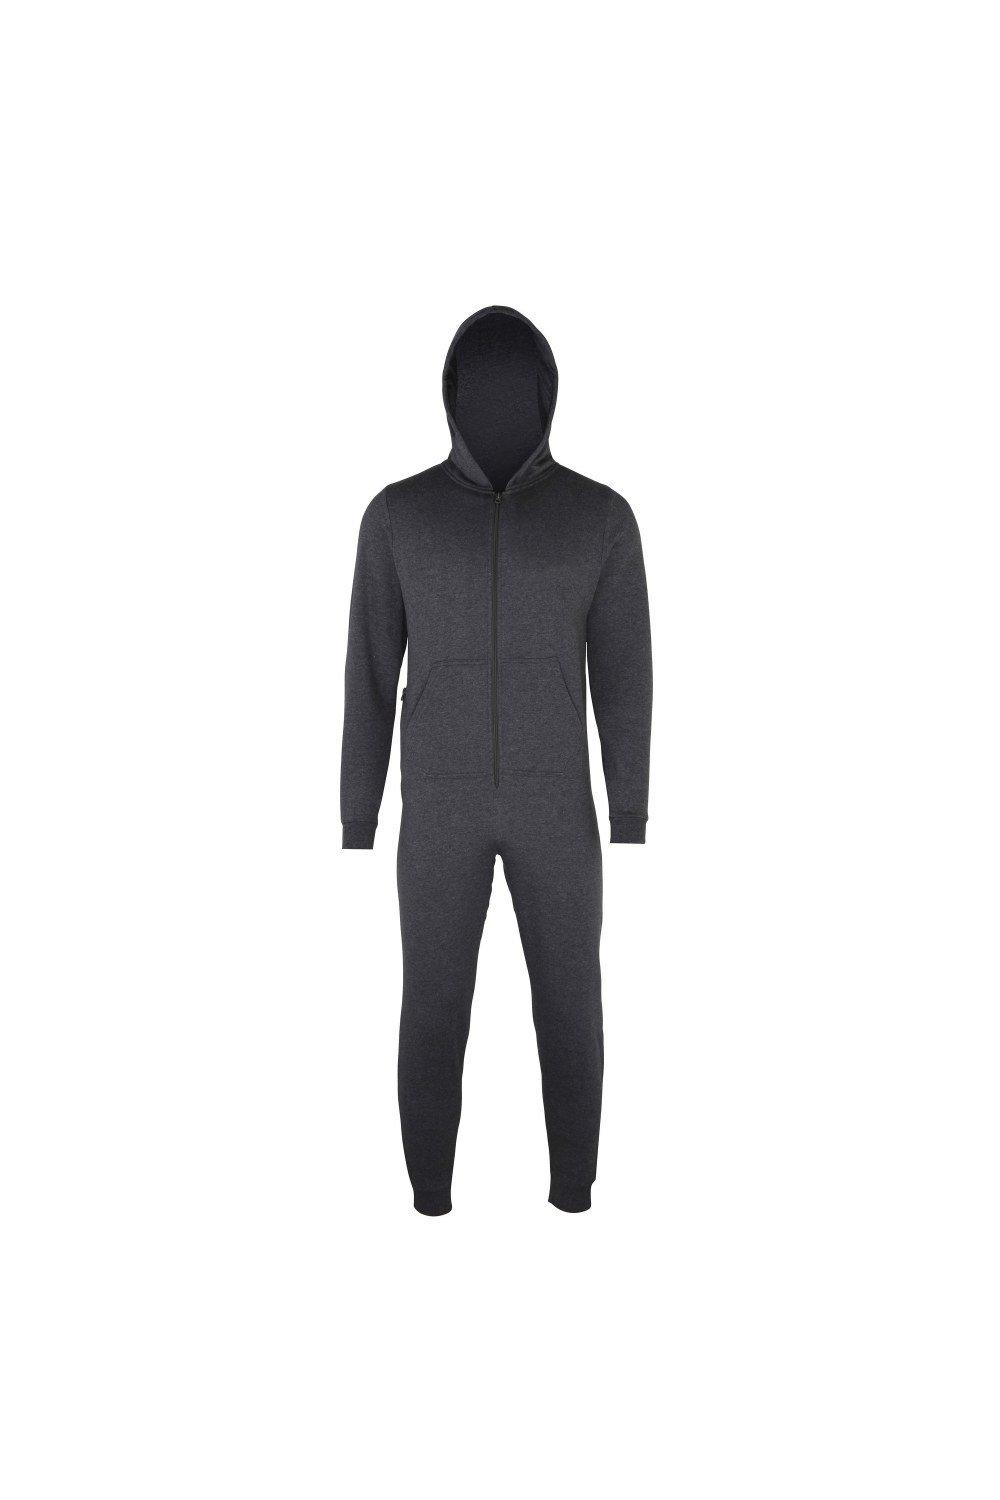 Comfy Co Plain All In One Onesie